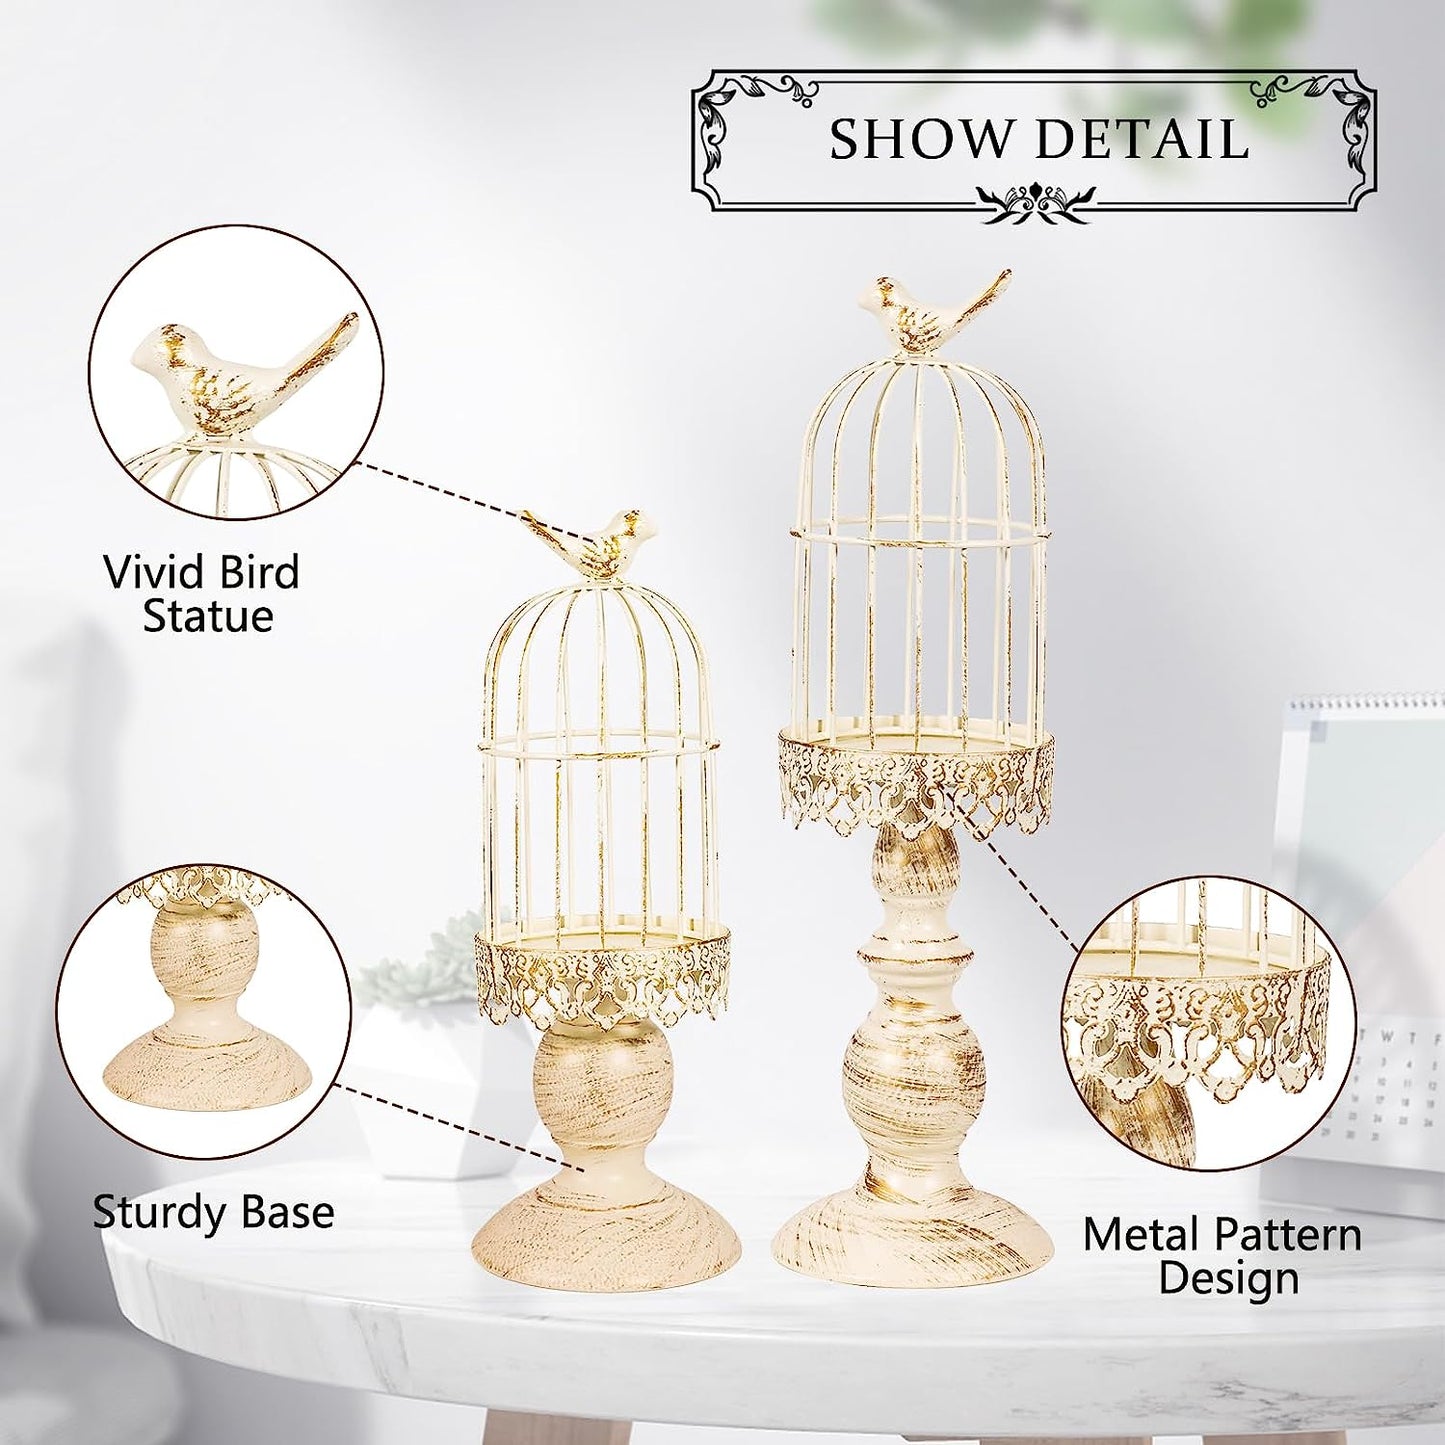 Pack of 2-Piece Birdcage Candle Holder, Vintage Candle Stick Holders, Wedding Candle Centerpieces for Tables, Iron Candlestick Holder Home Decor